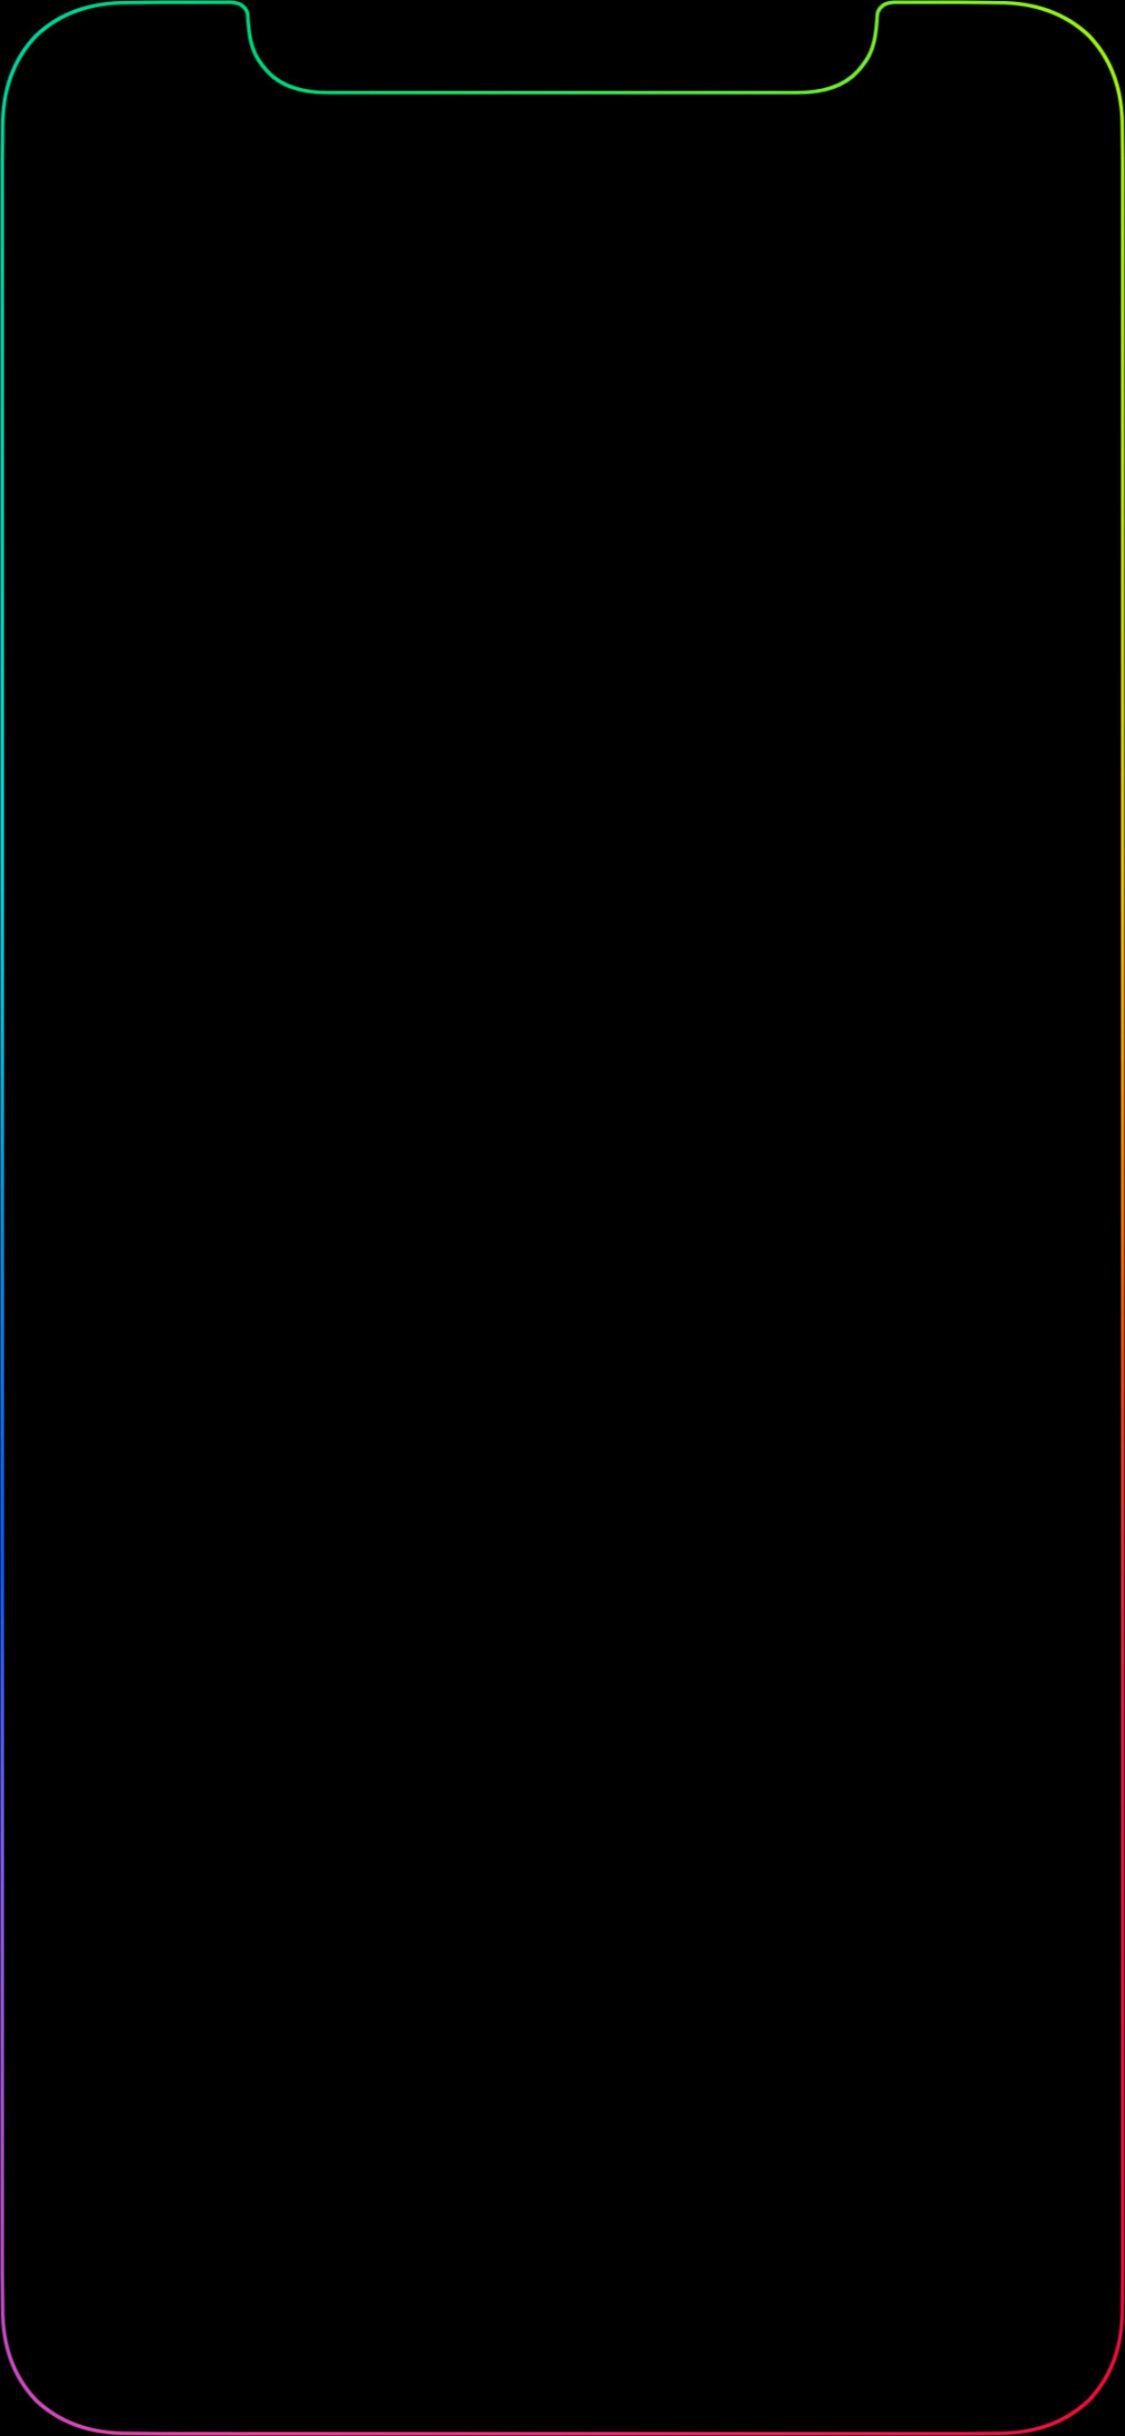 Anyone interested in the Rainbow Border wallpaper sized for iPhone XS Max? (1242 x 2688)